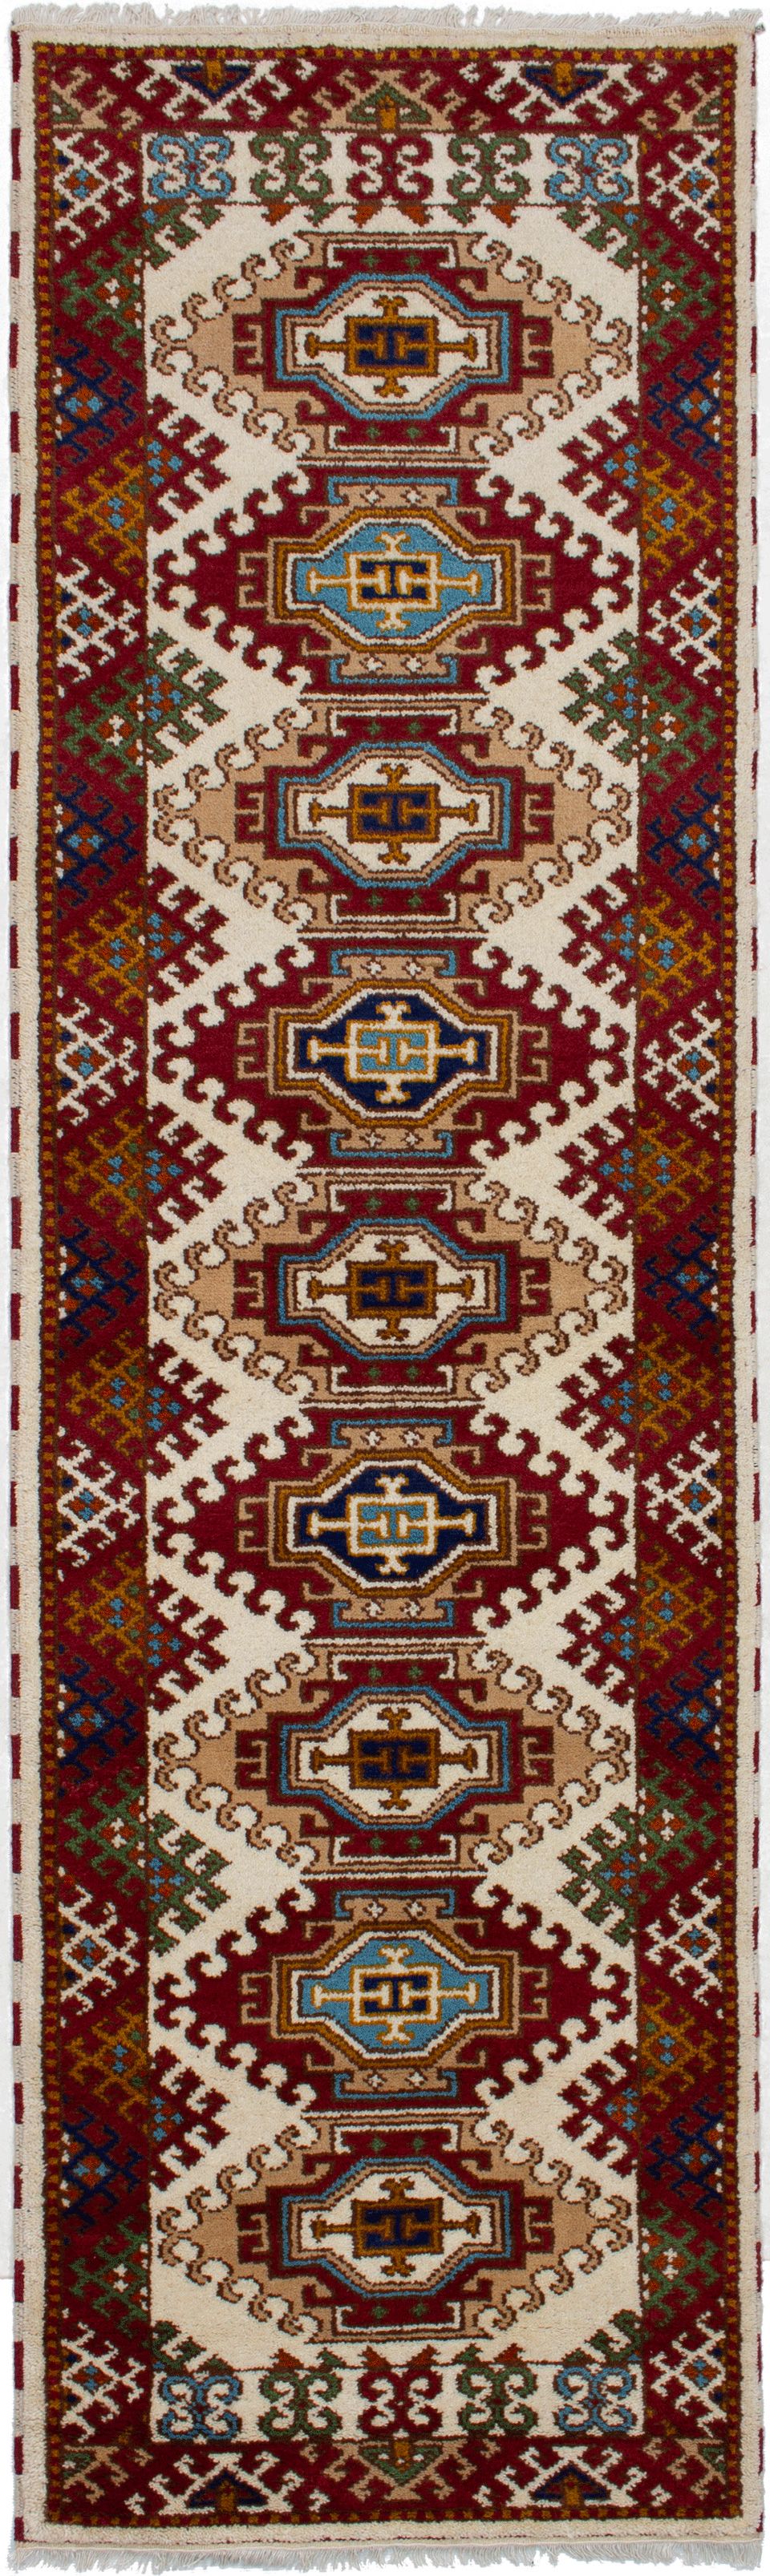 Hand-knotted Royal Kazak Cream, Red Wool Rug 2'10" x 9'11" Size: 2'10" x 9'11"  